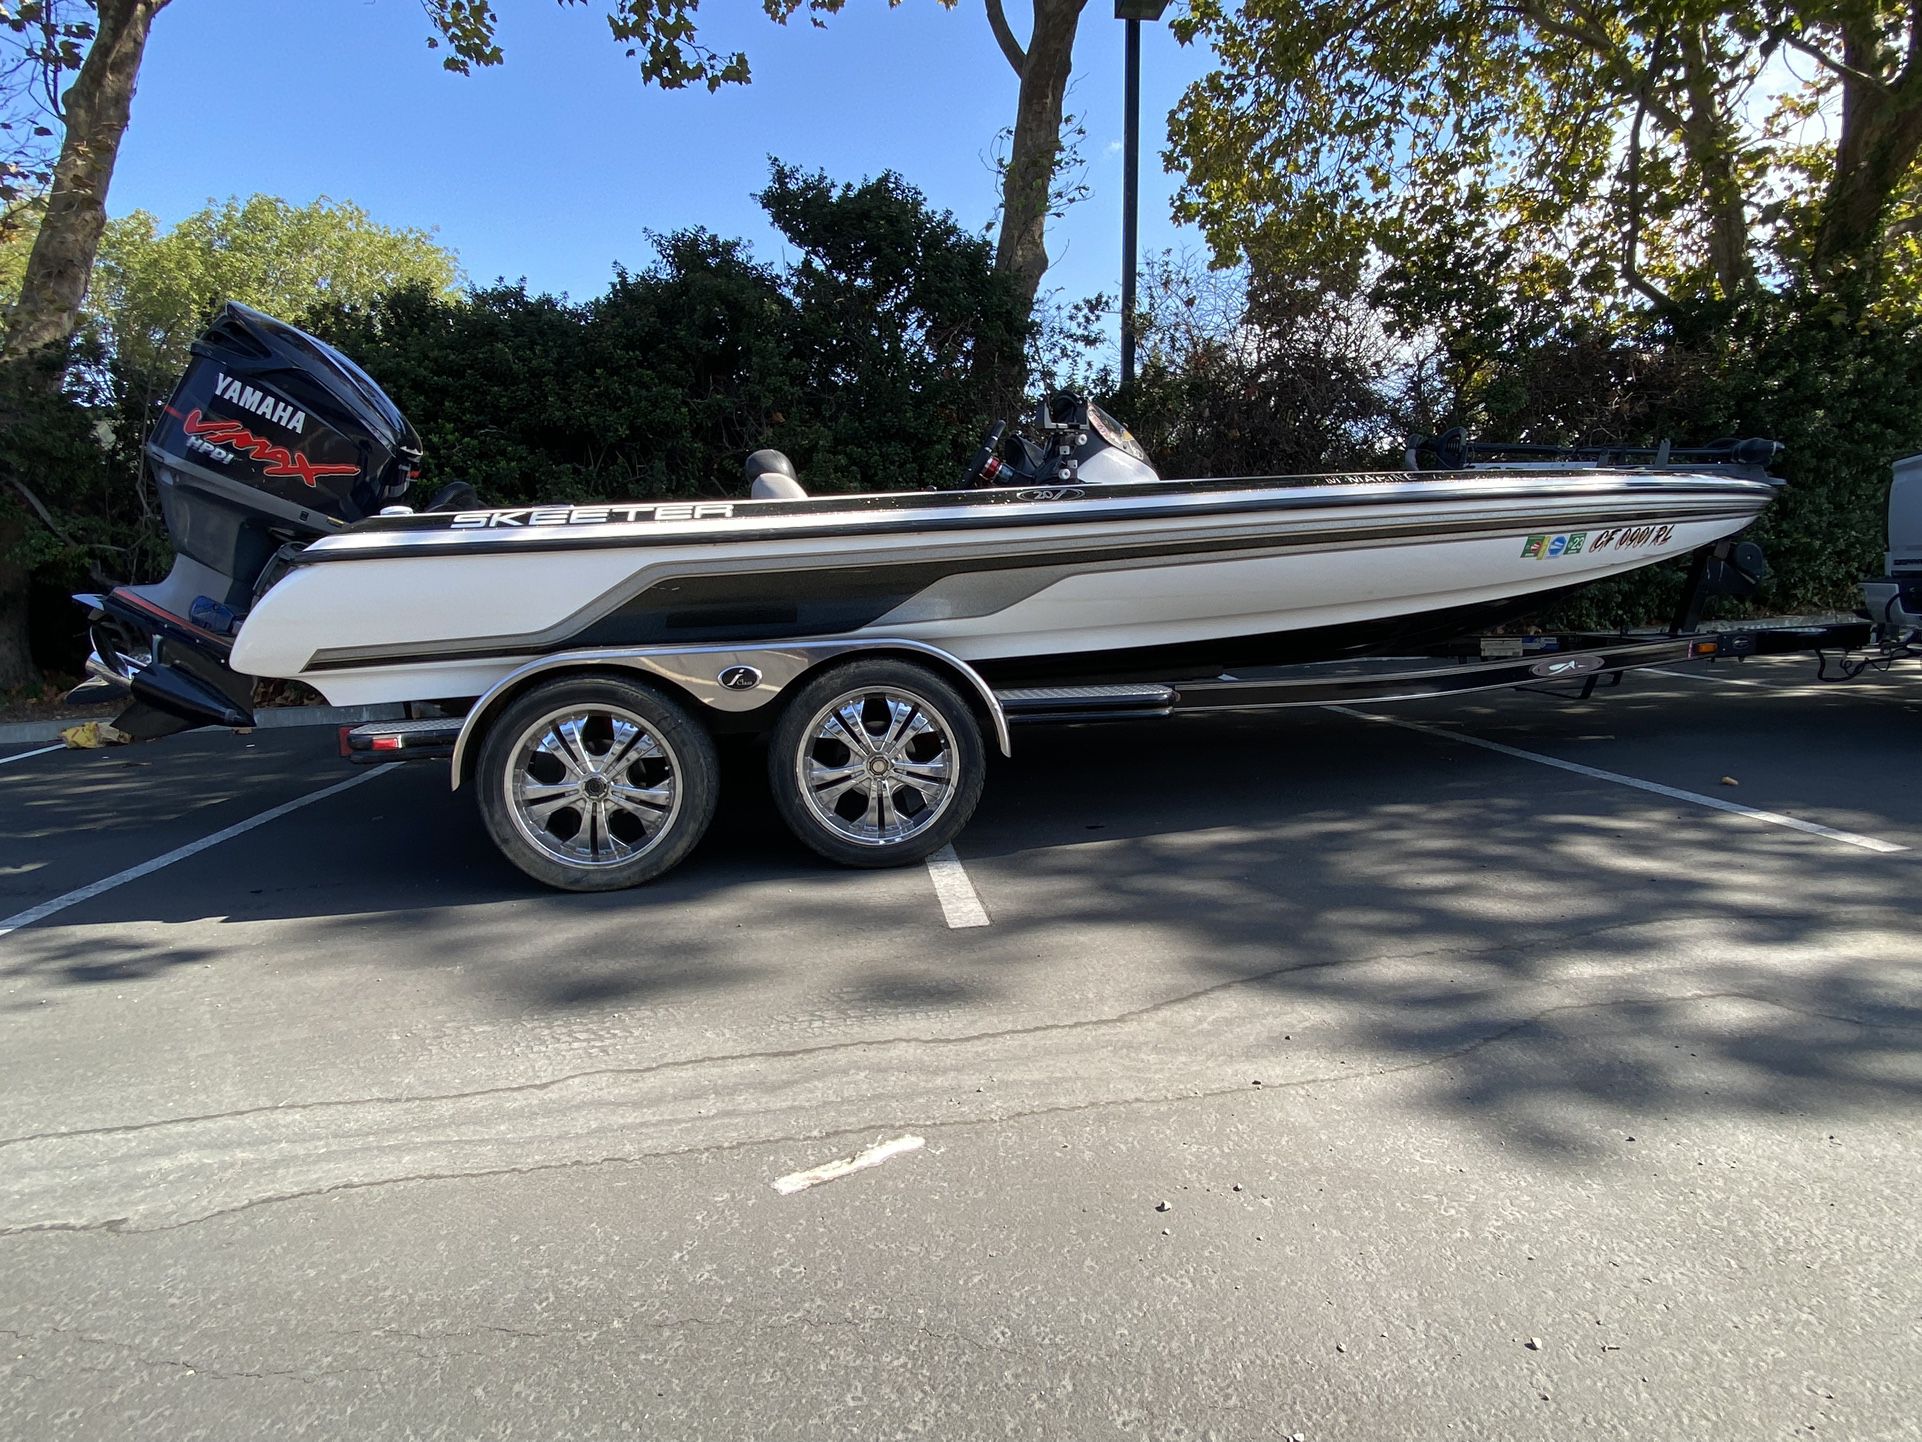 2006 Skeeter 20i Bass Boat New Powerhead New Lower Unit. Possible Trade For C-10 Truck